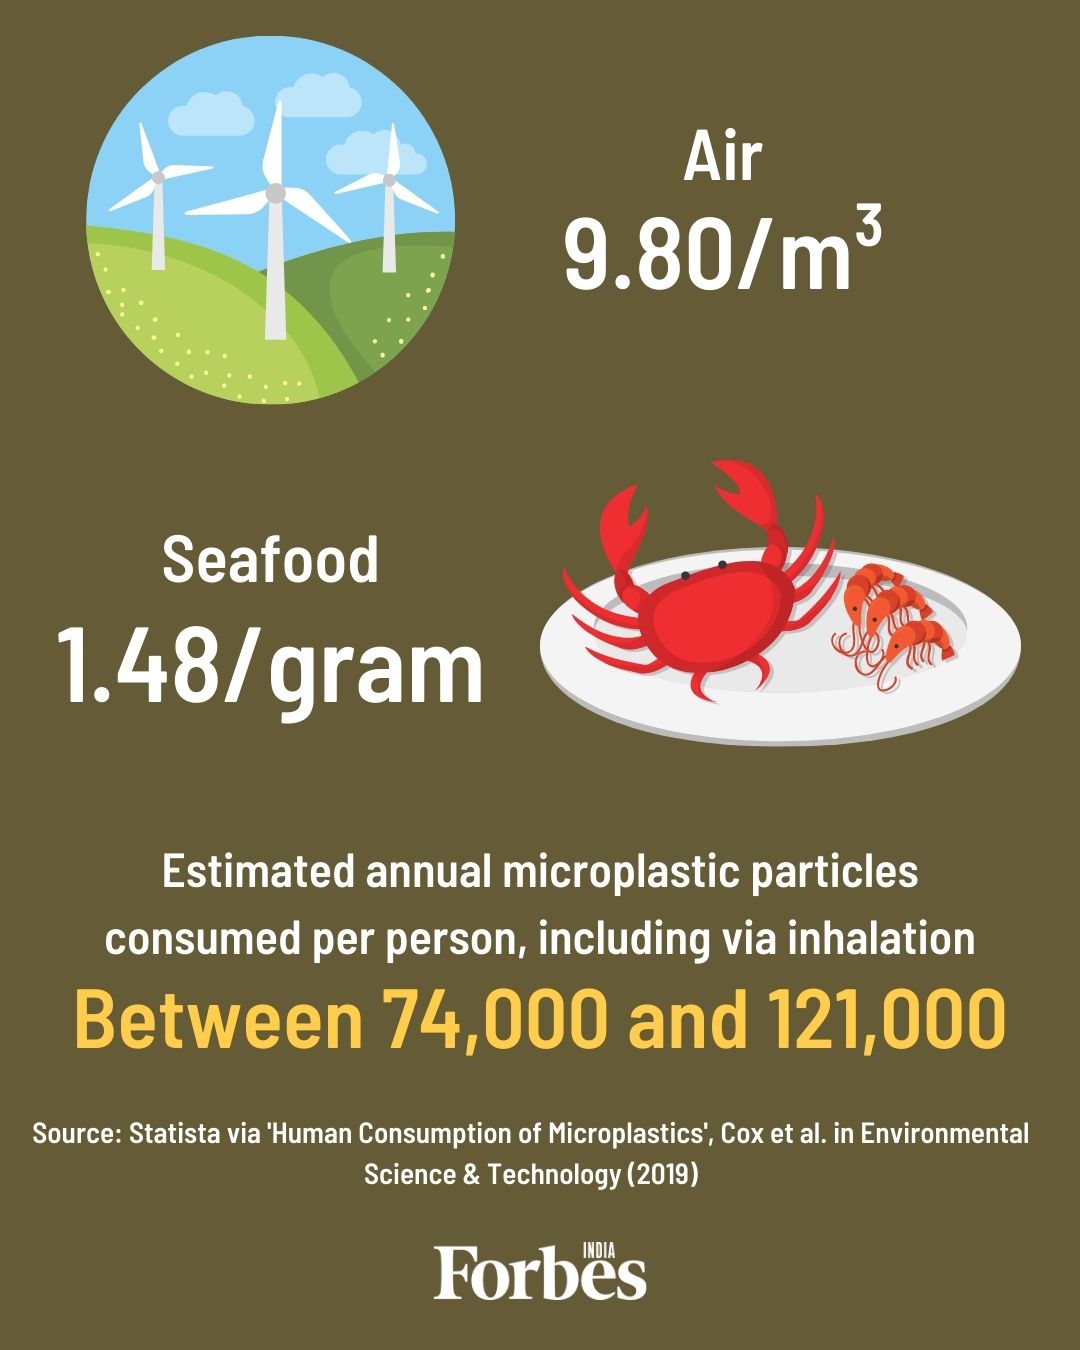 How much microplastic do we breathe, eat, drink?